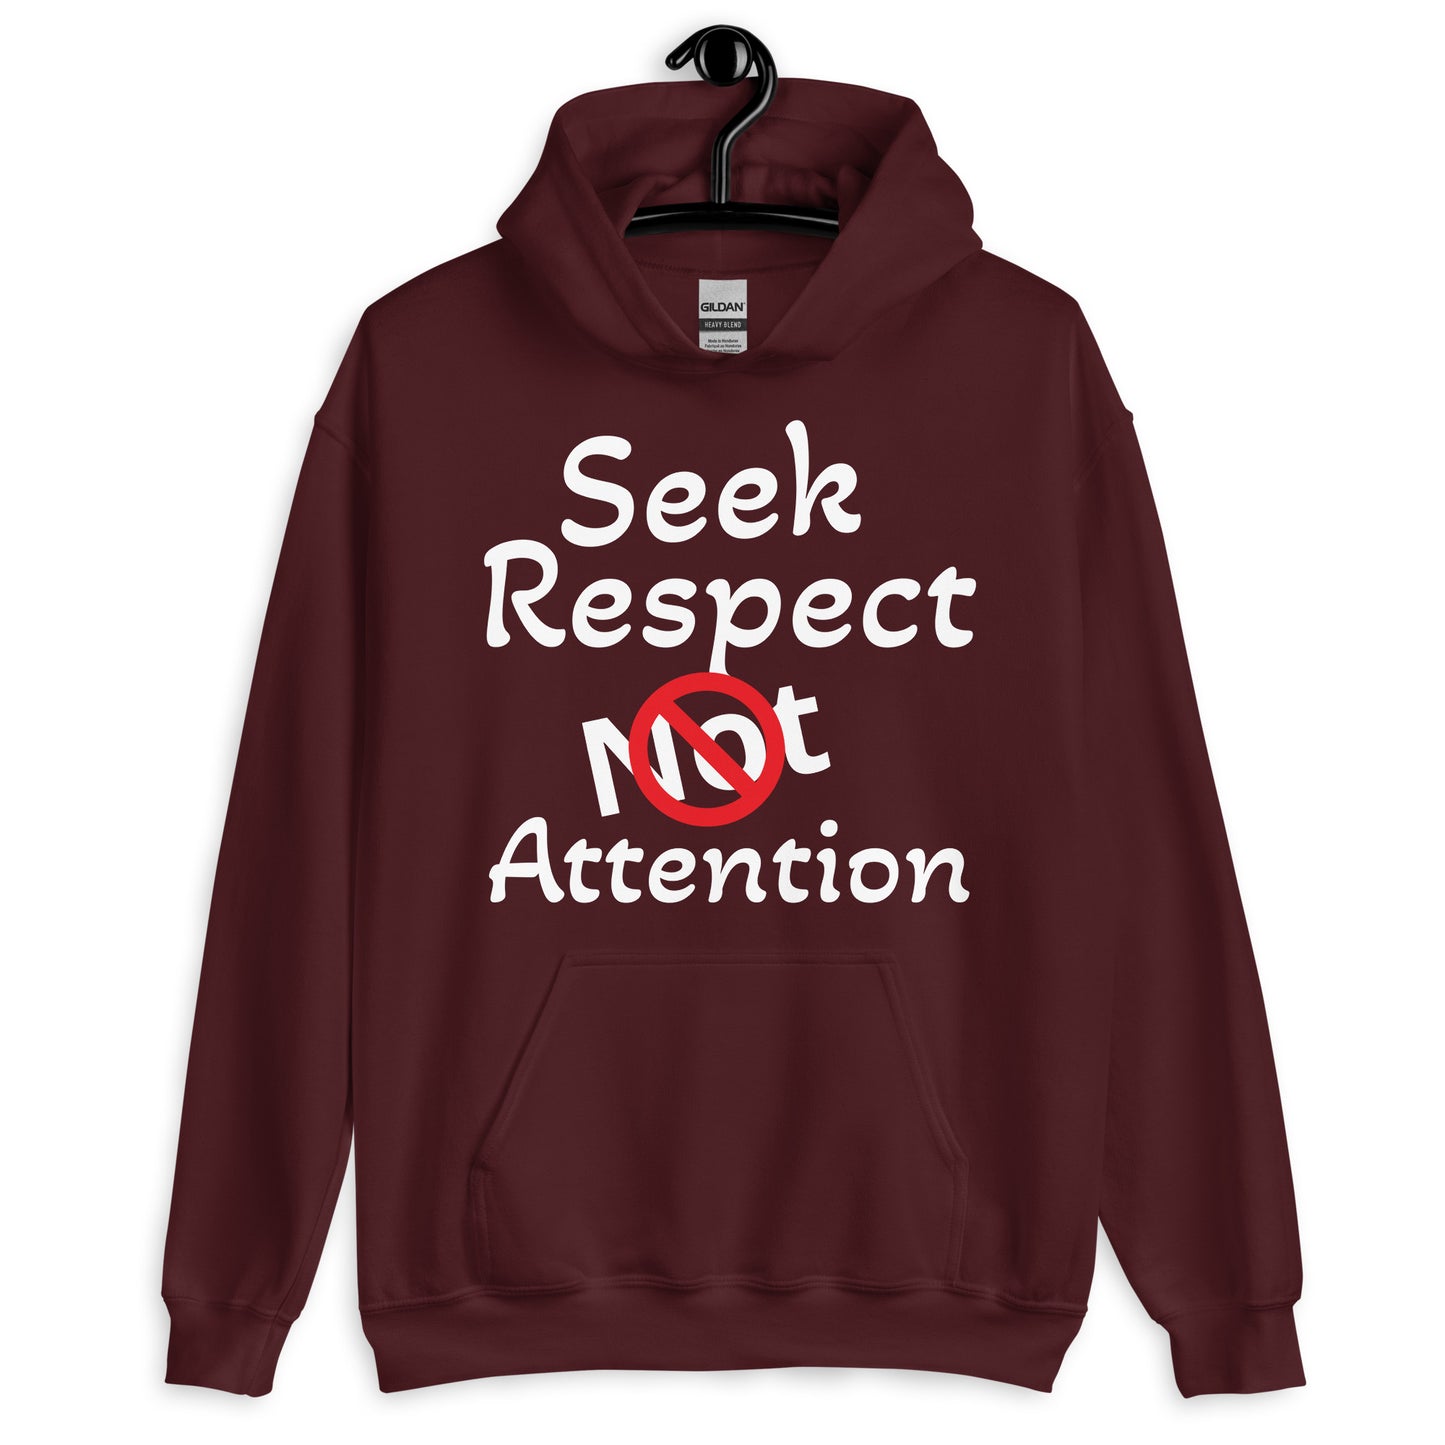 Our ‘Respect’ Unisex Hoodie